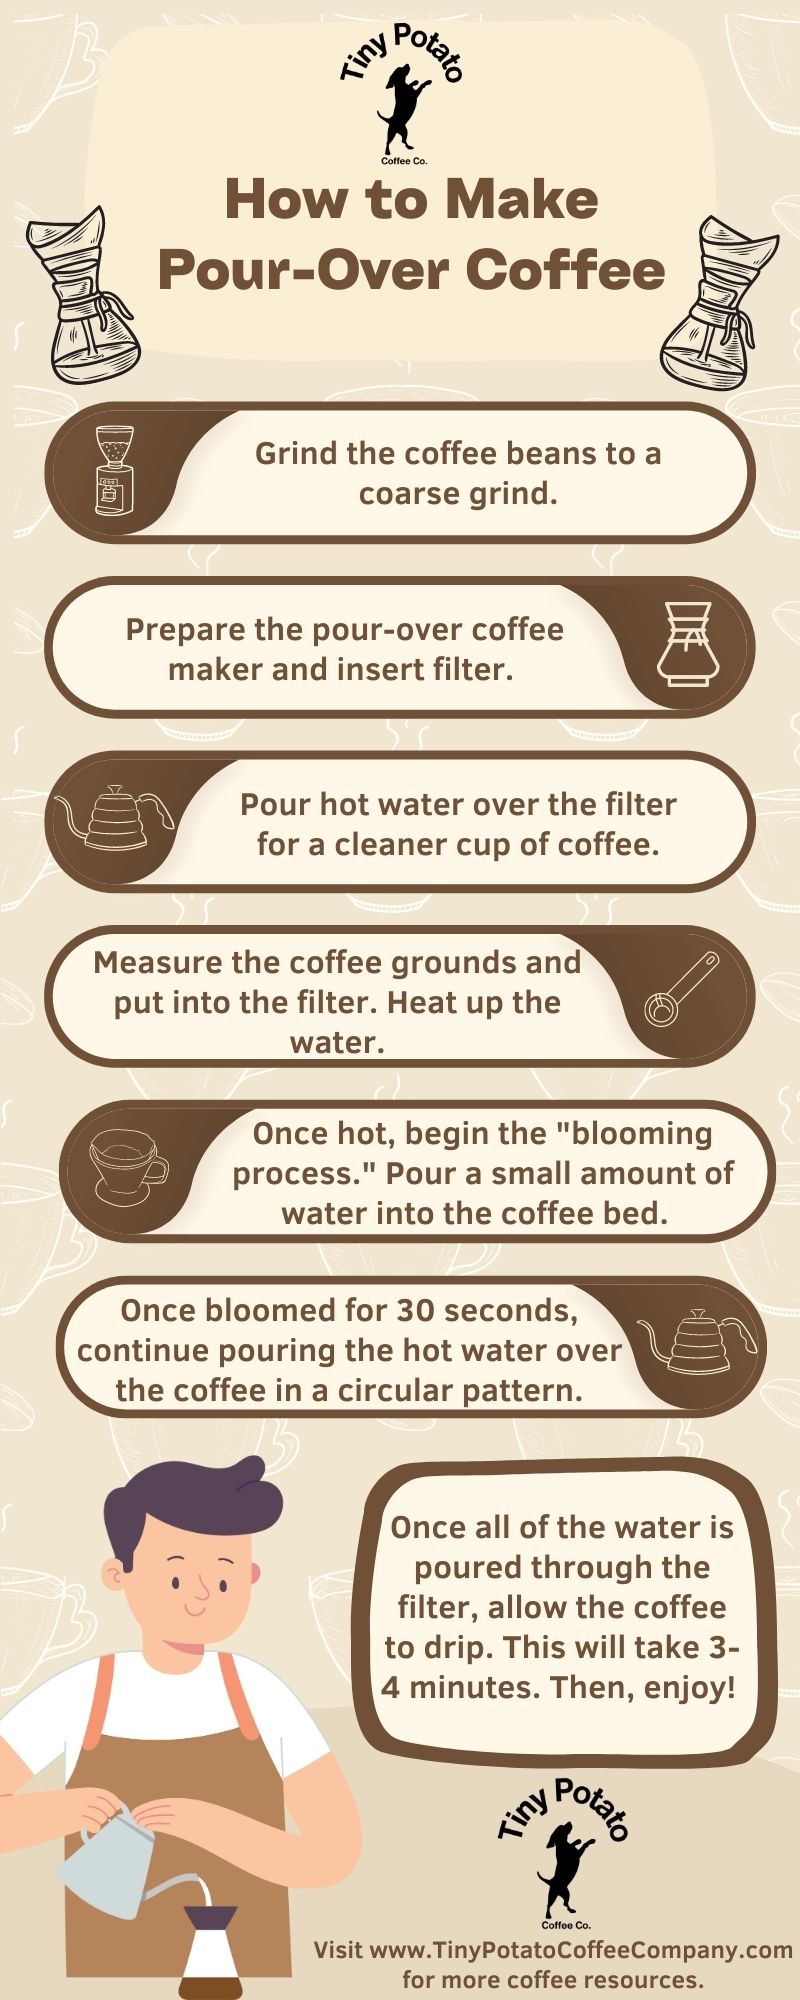 how to make pour-over coffee infographic